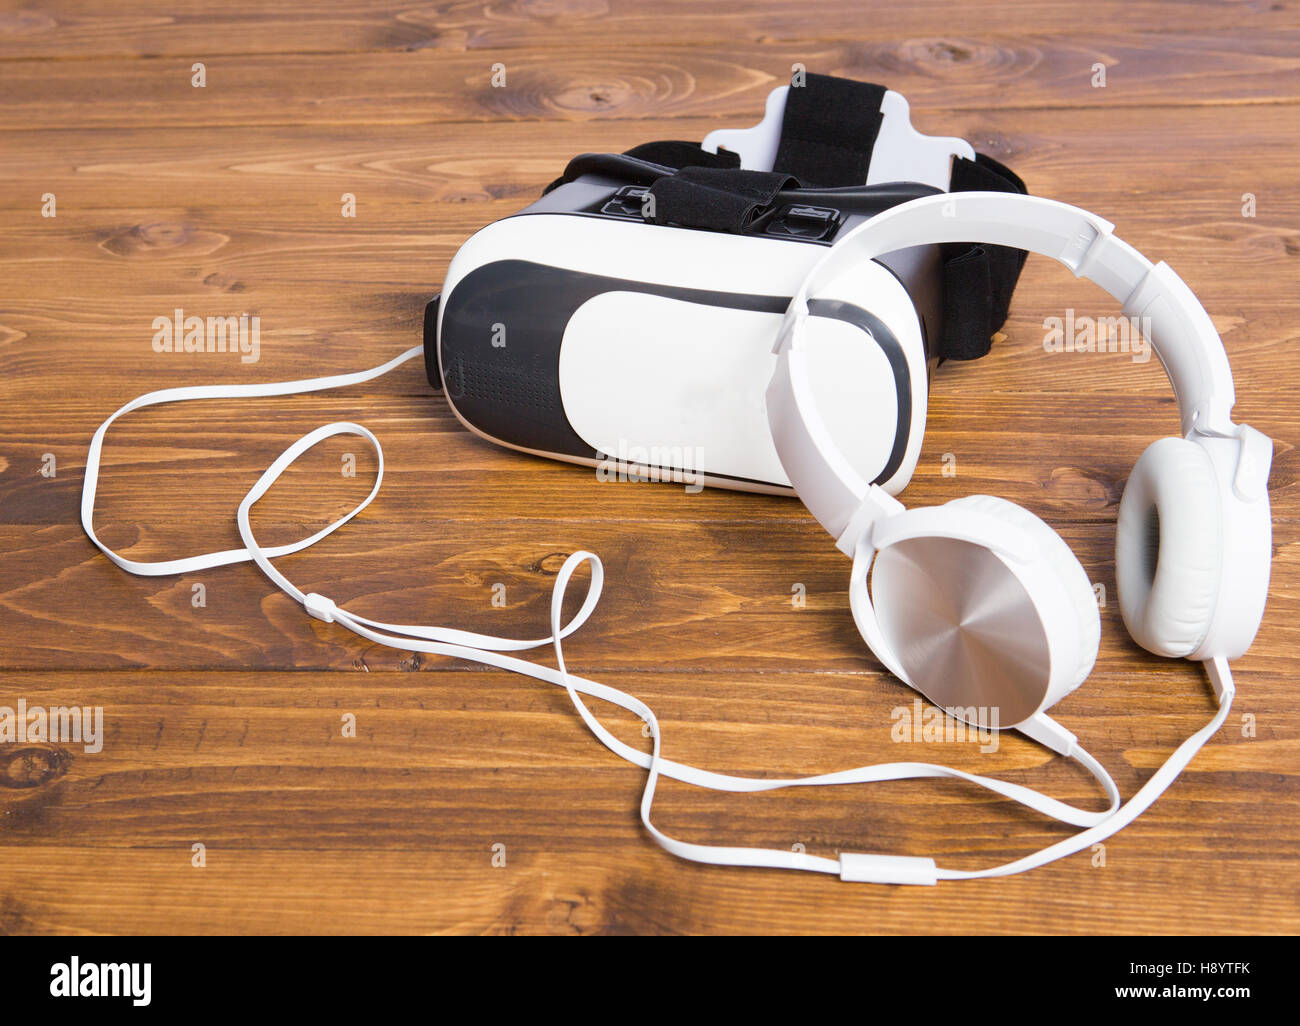 VR headset and circumaural earphone put together in a mess, isolated on wooden floor background Stock Photo